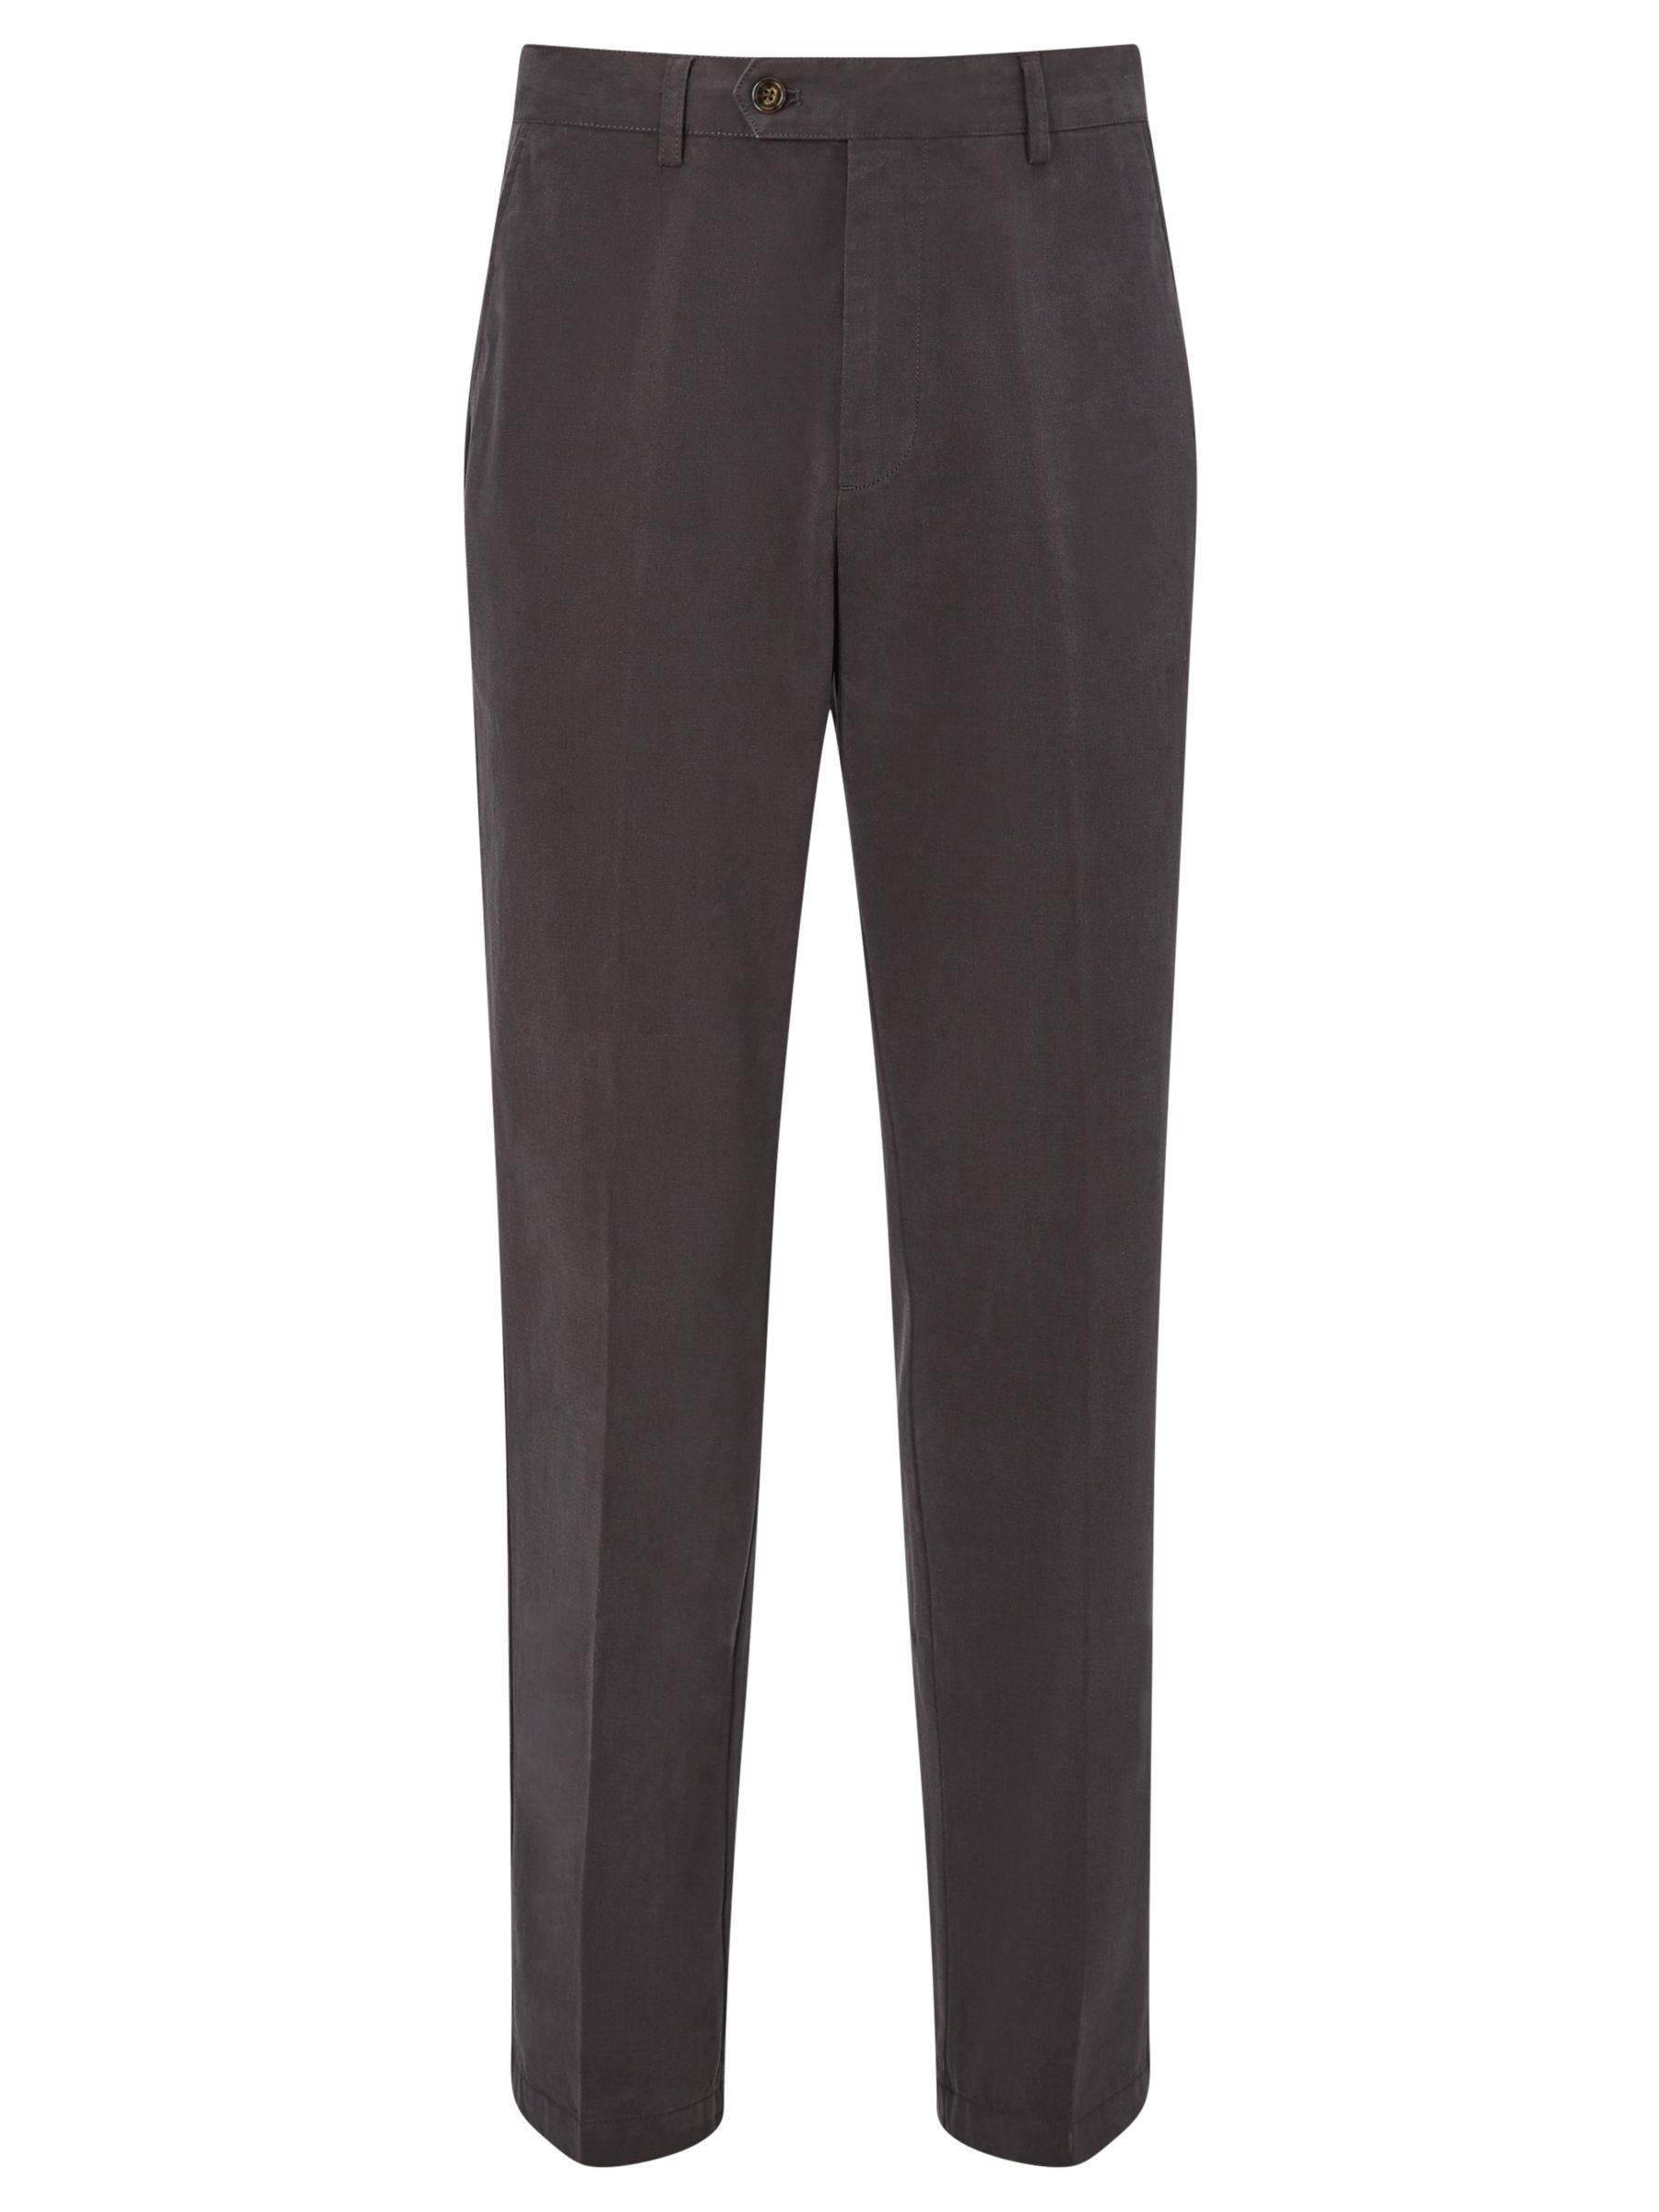 John Lewis & Partners Wrinkle Free Flat Front Trousers, Grey, 40R